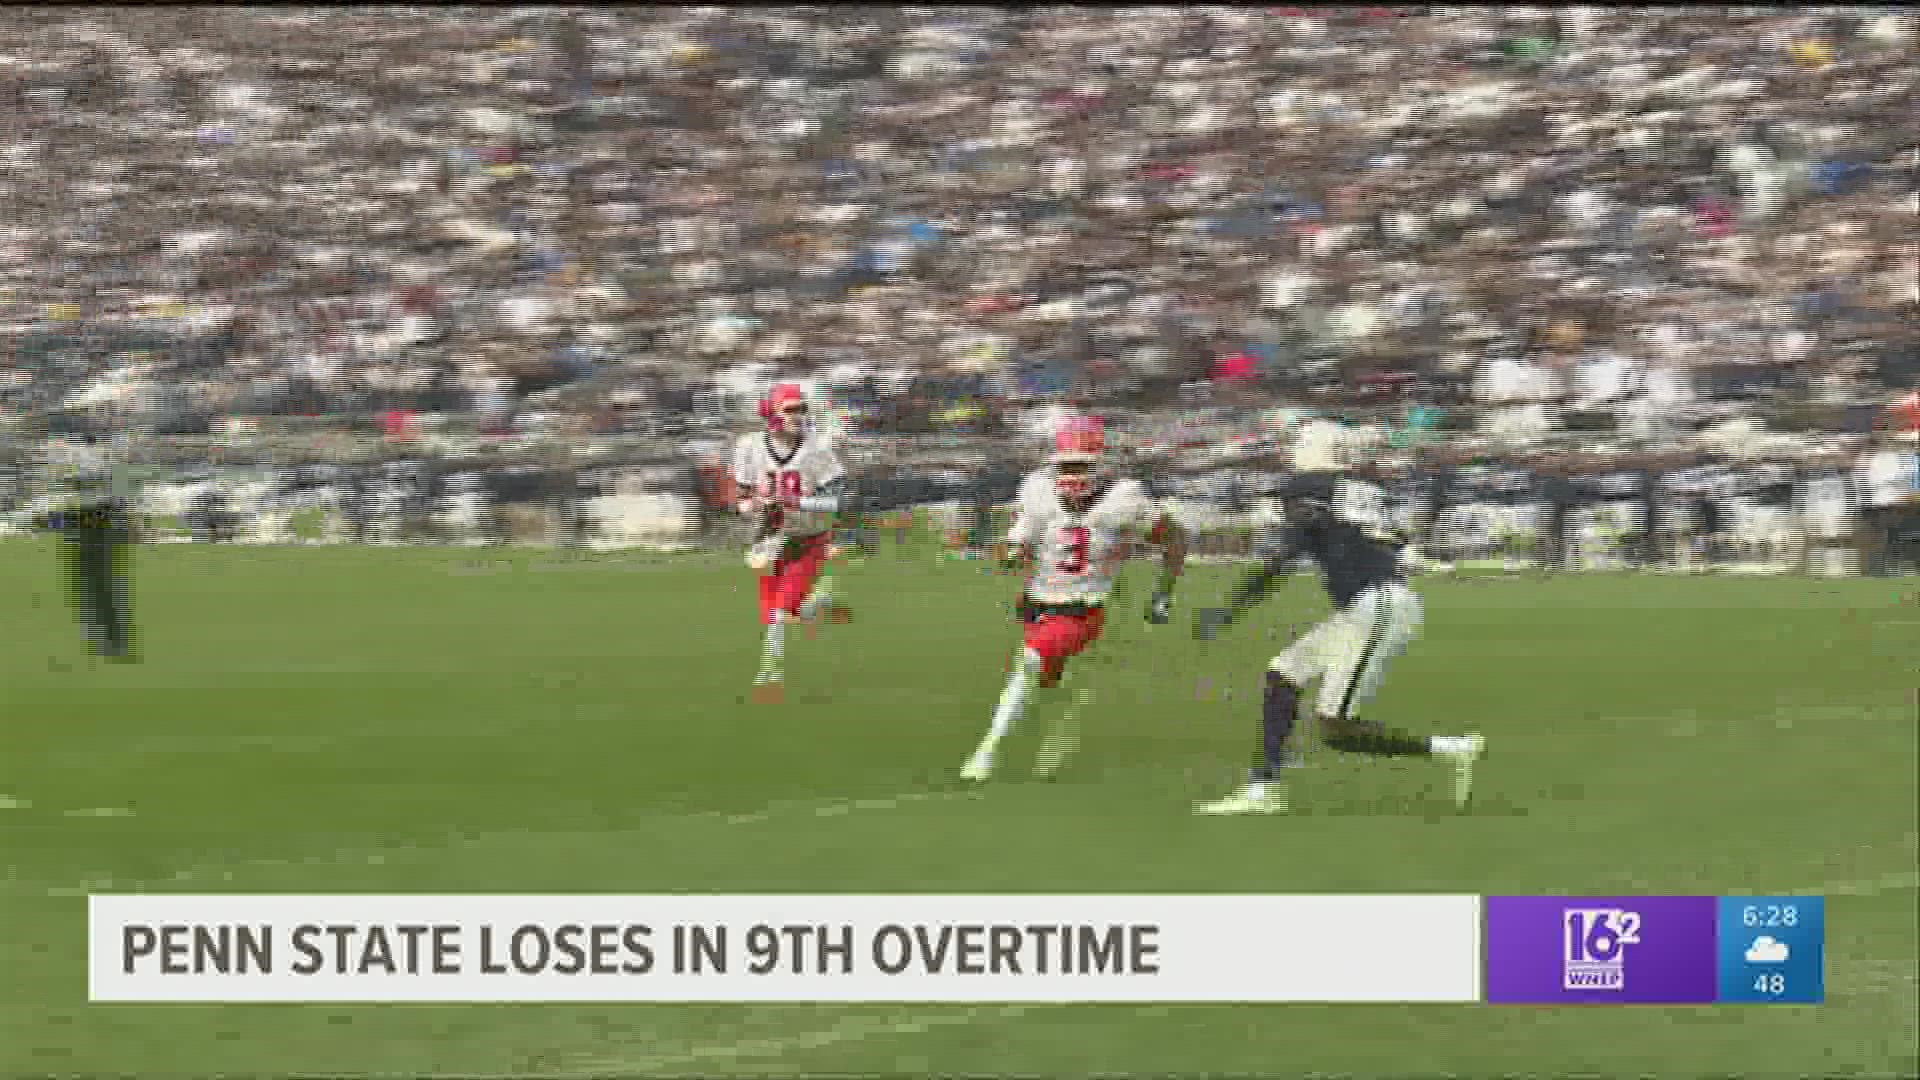 Penn State loses at home in 9th overtime